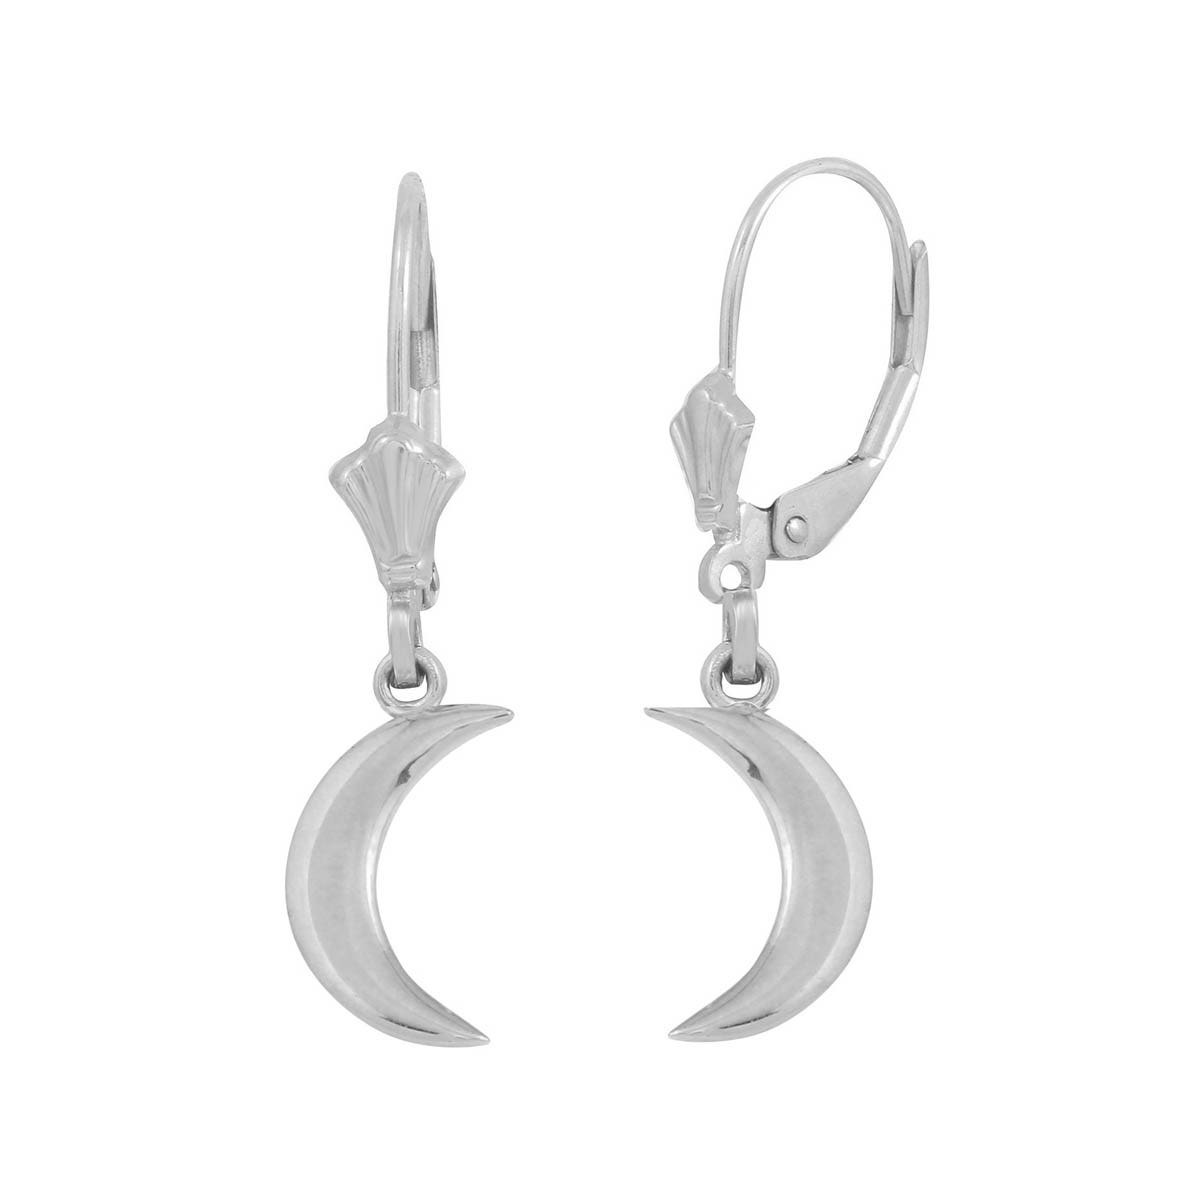 Gold Boutique - Gents Earrings - Silver GOOFASH